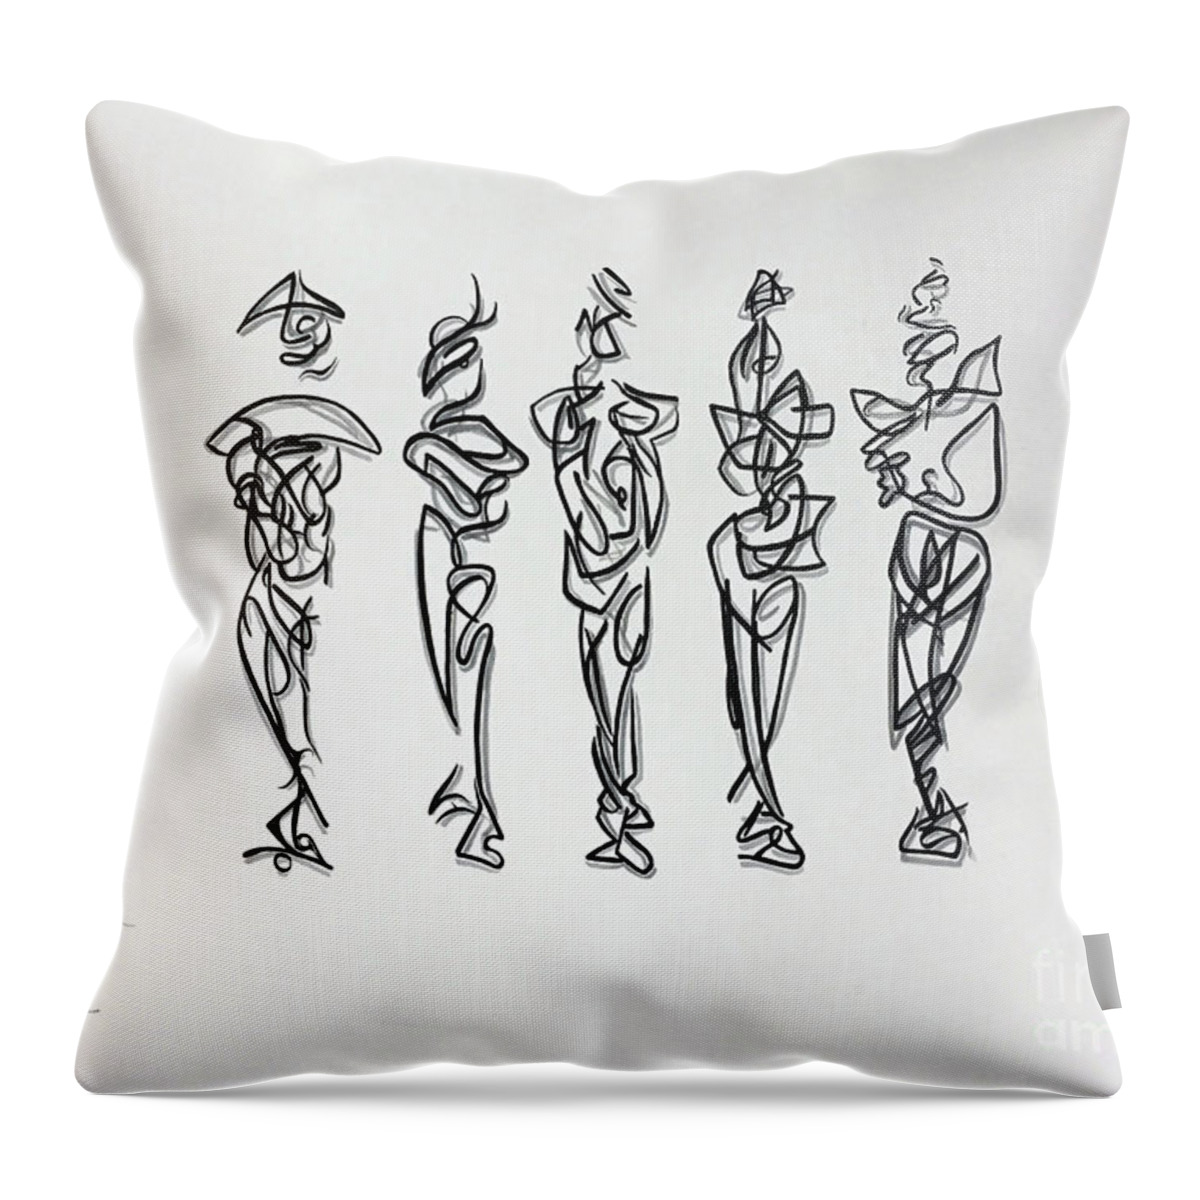  Throw Pillow featuring the drawing Five Muses by James Lanigan Thompson MFA